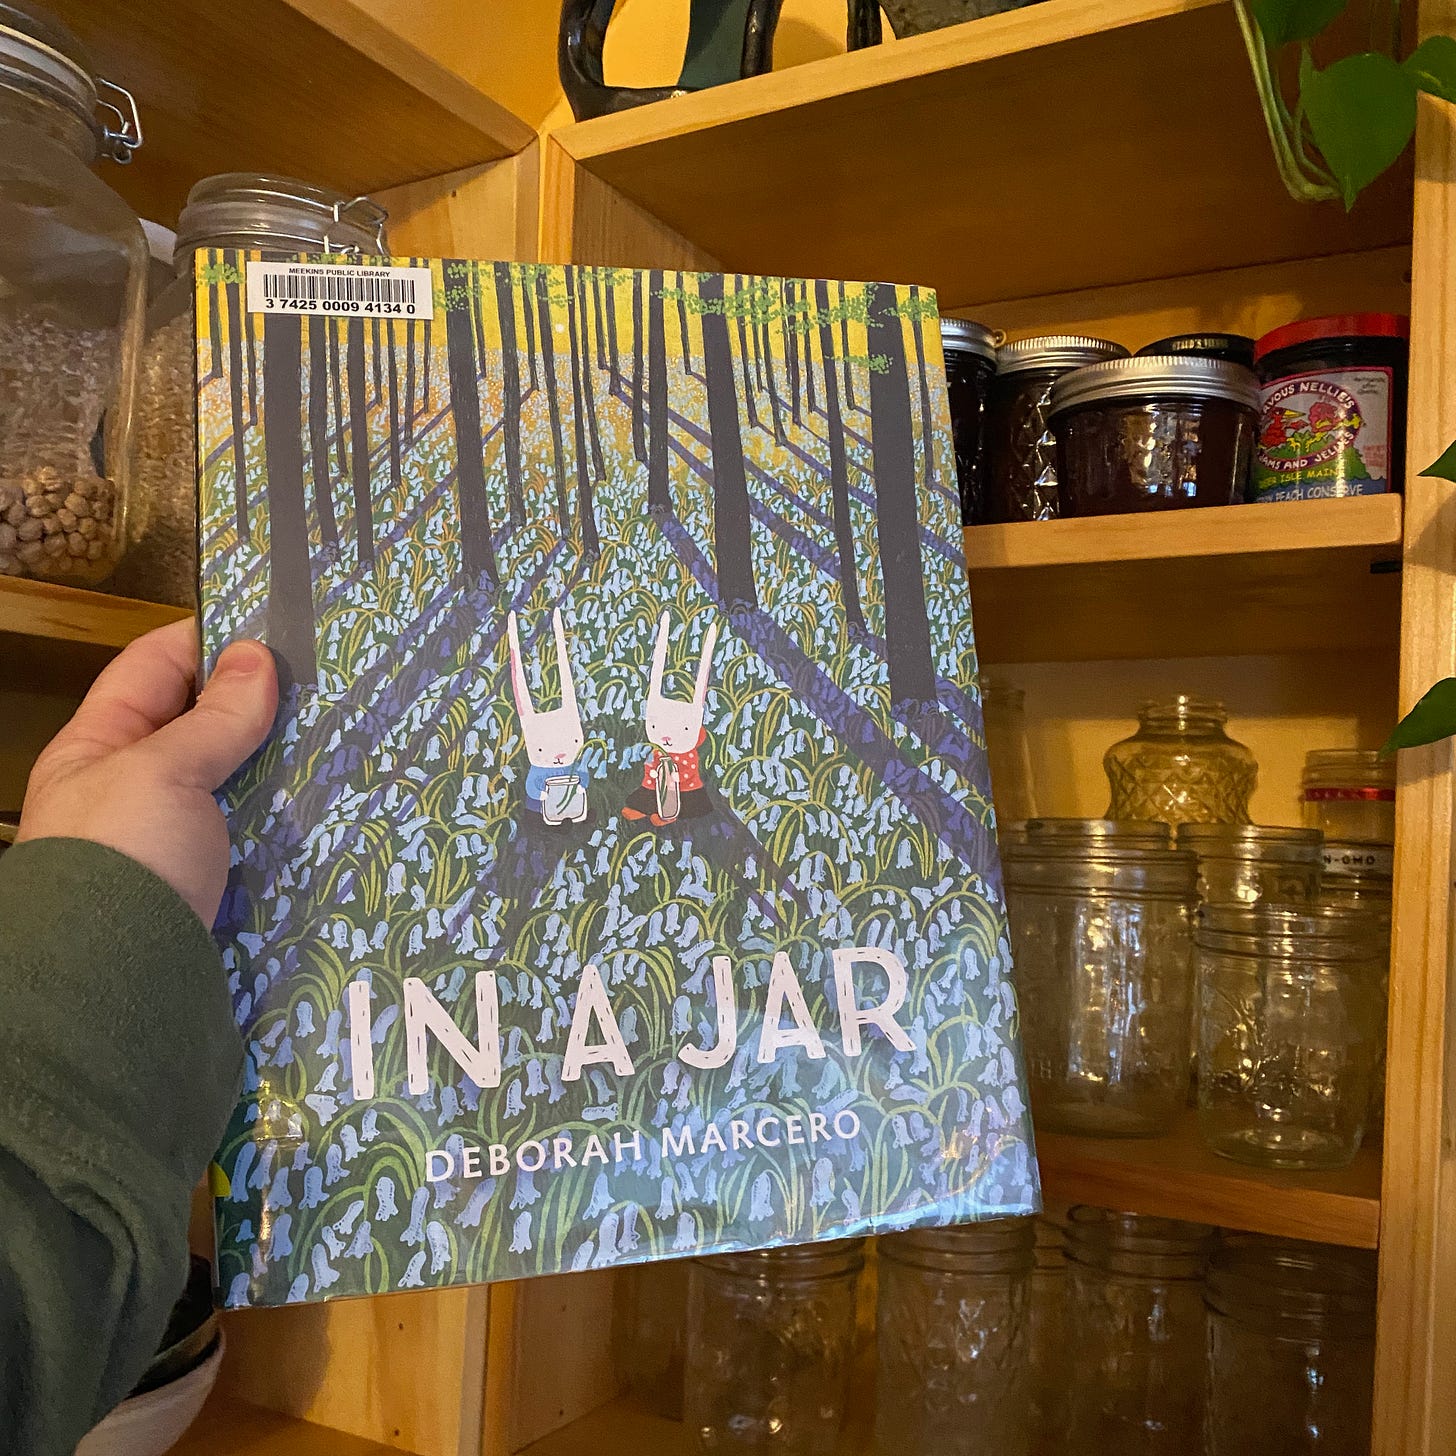 I’m holding this book in front of my kitchen shelves, full of empty mason jars, jam jars, and big glass jars of beans.